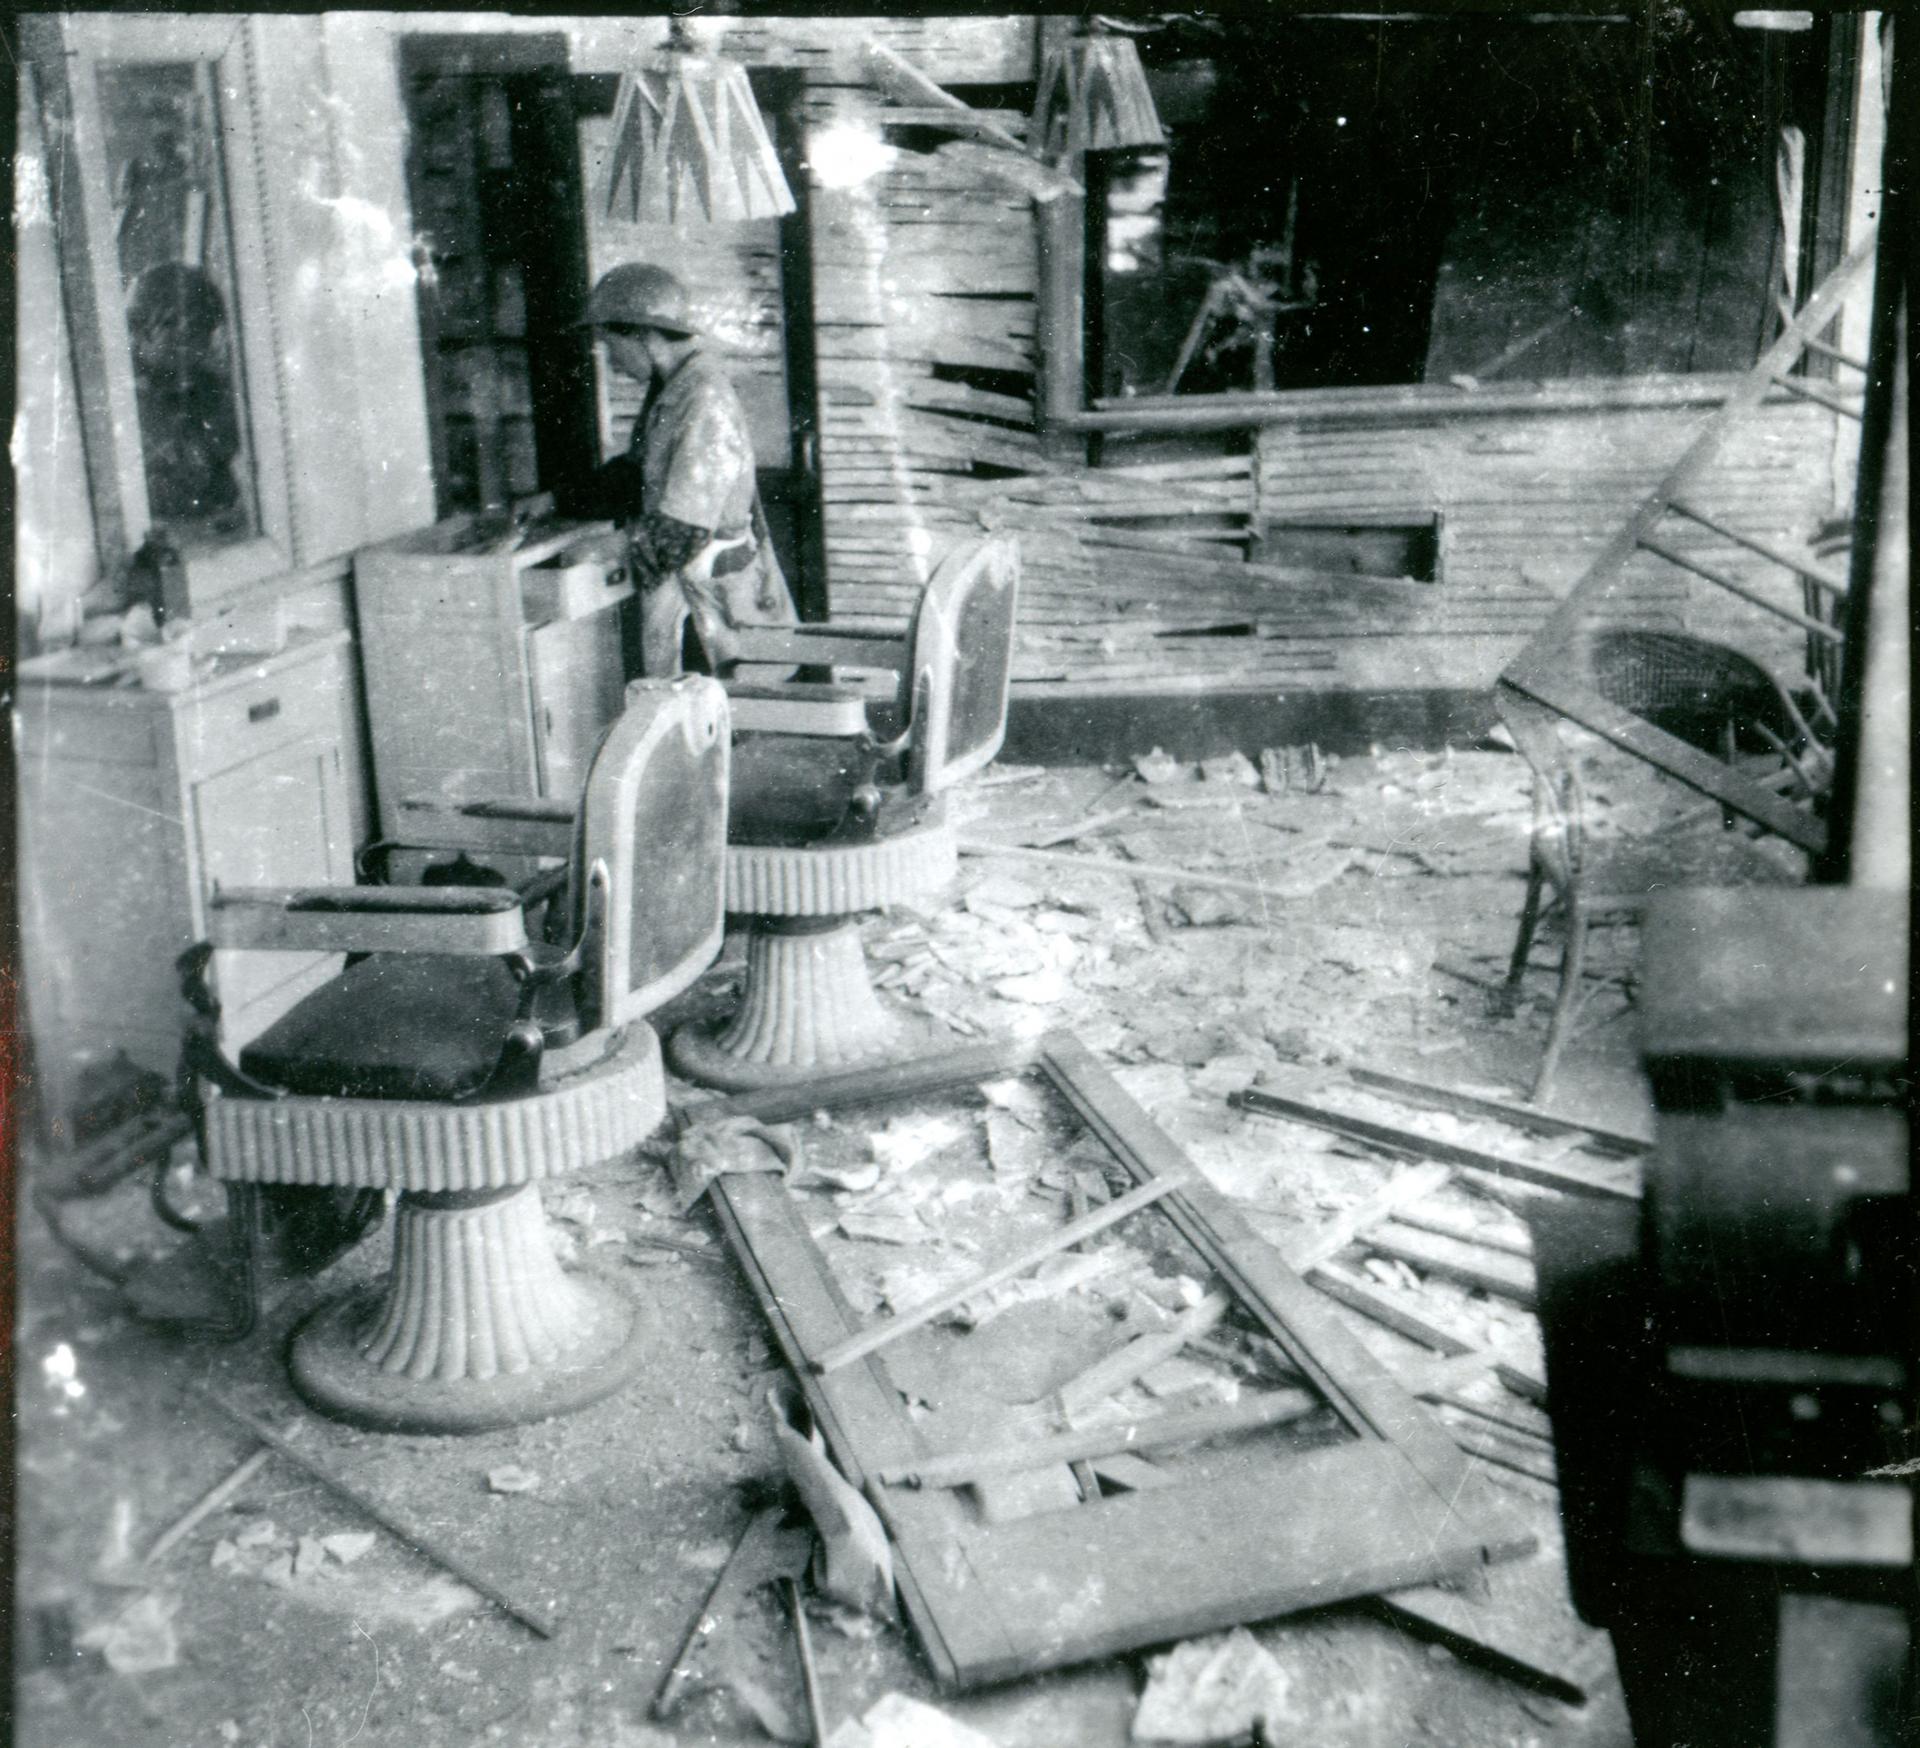 Two barbershop chairs are shown with broken glass on the floor and a woman looking through a drawer.